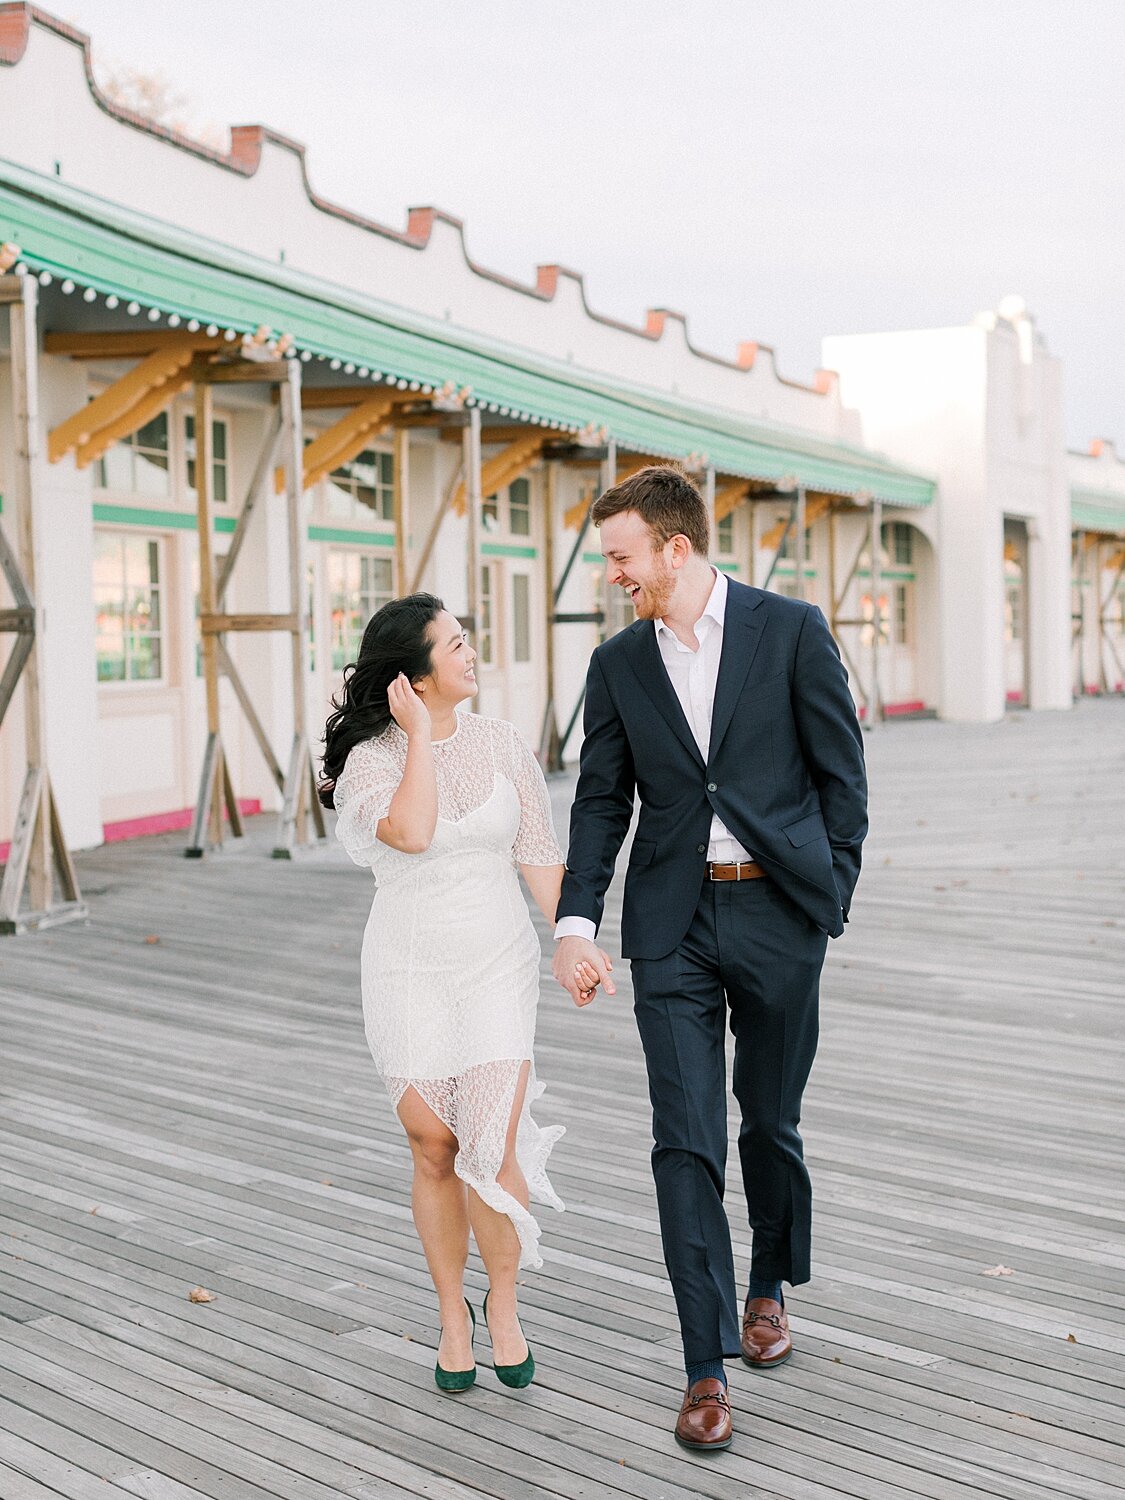 boardwalk engagement session by Asher Gardner Photography